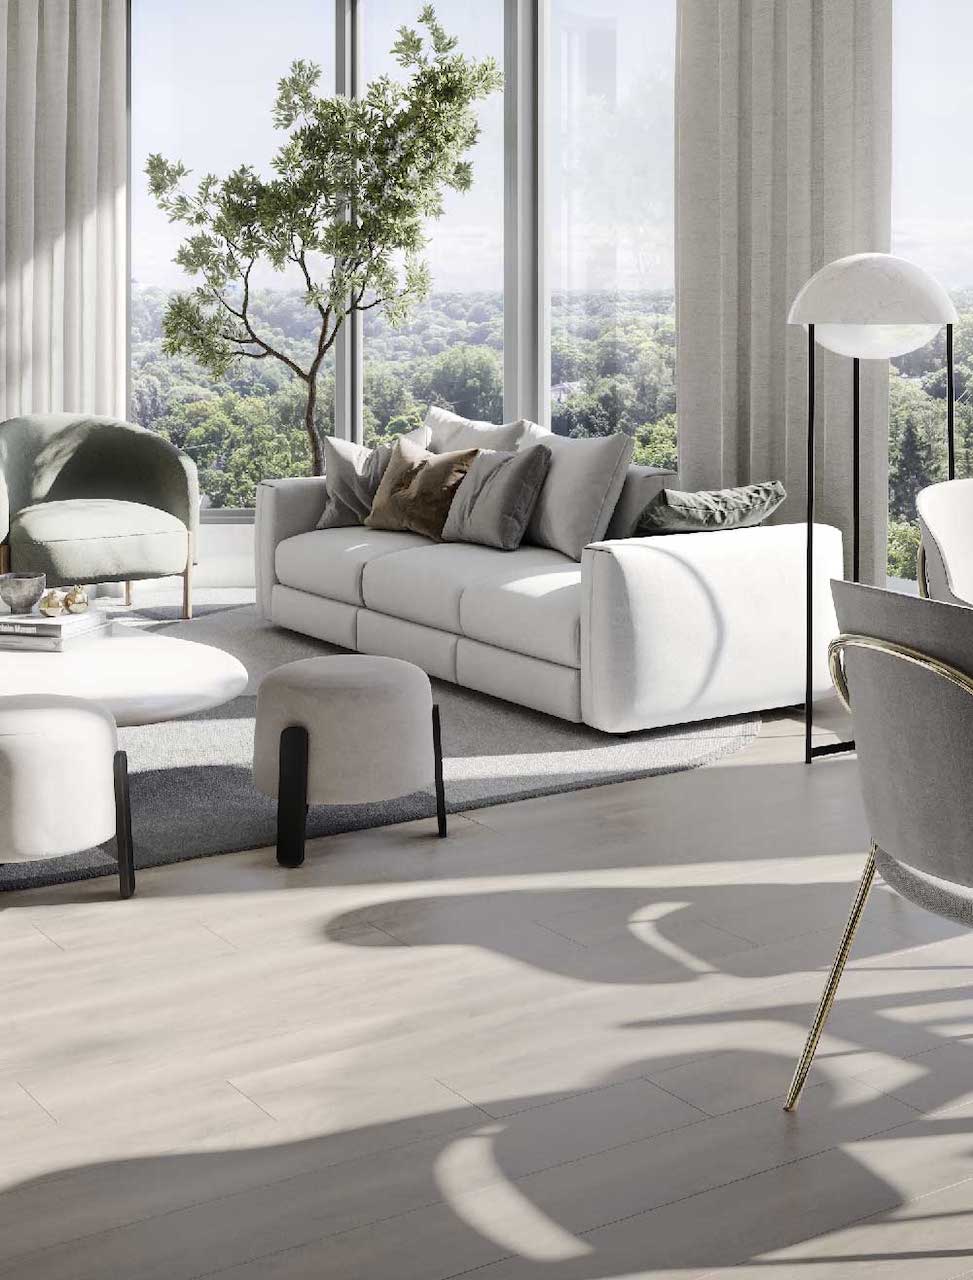 Interior rendering of High Line Condos suite living room